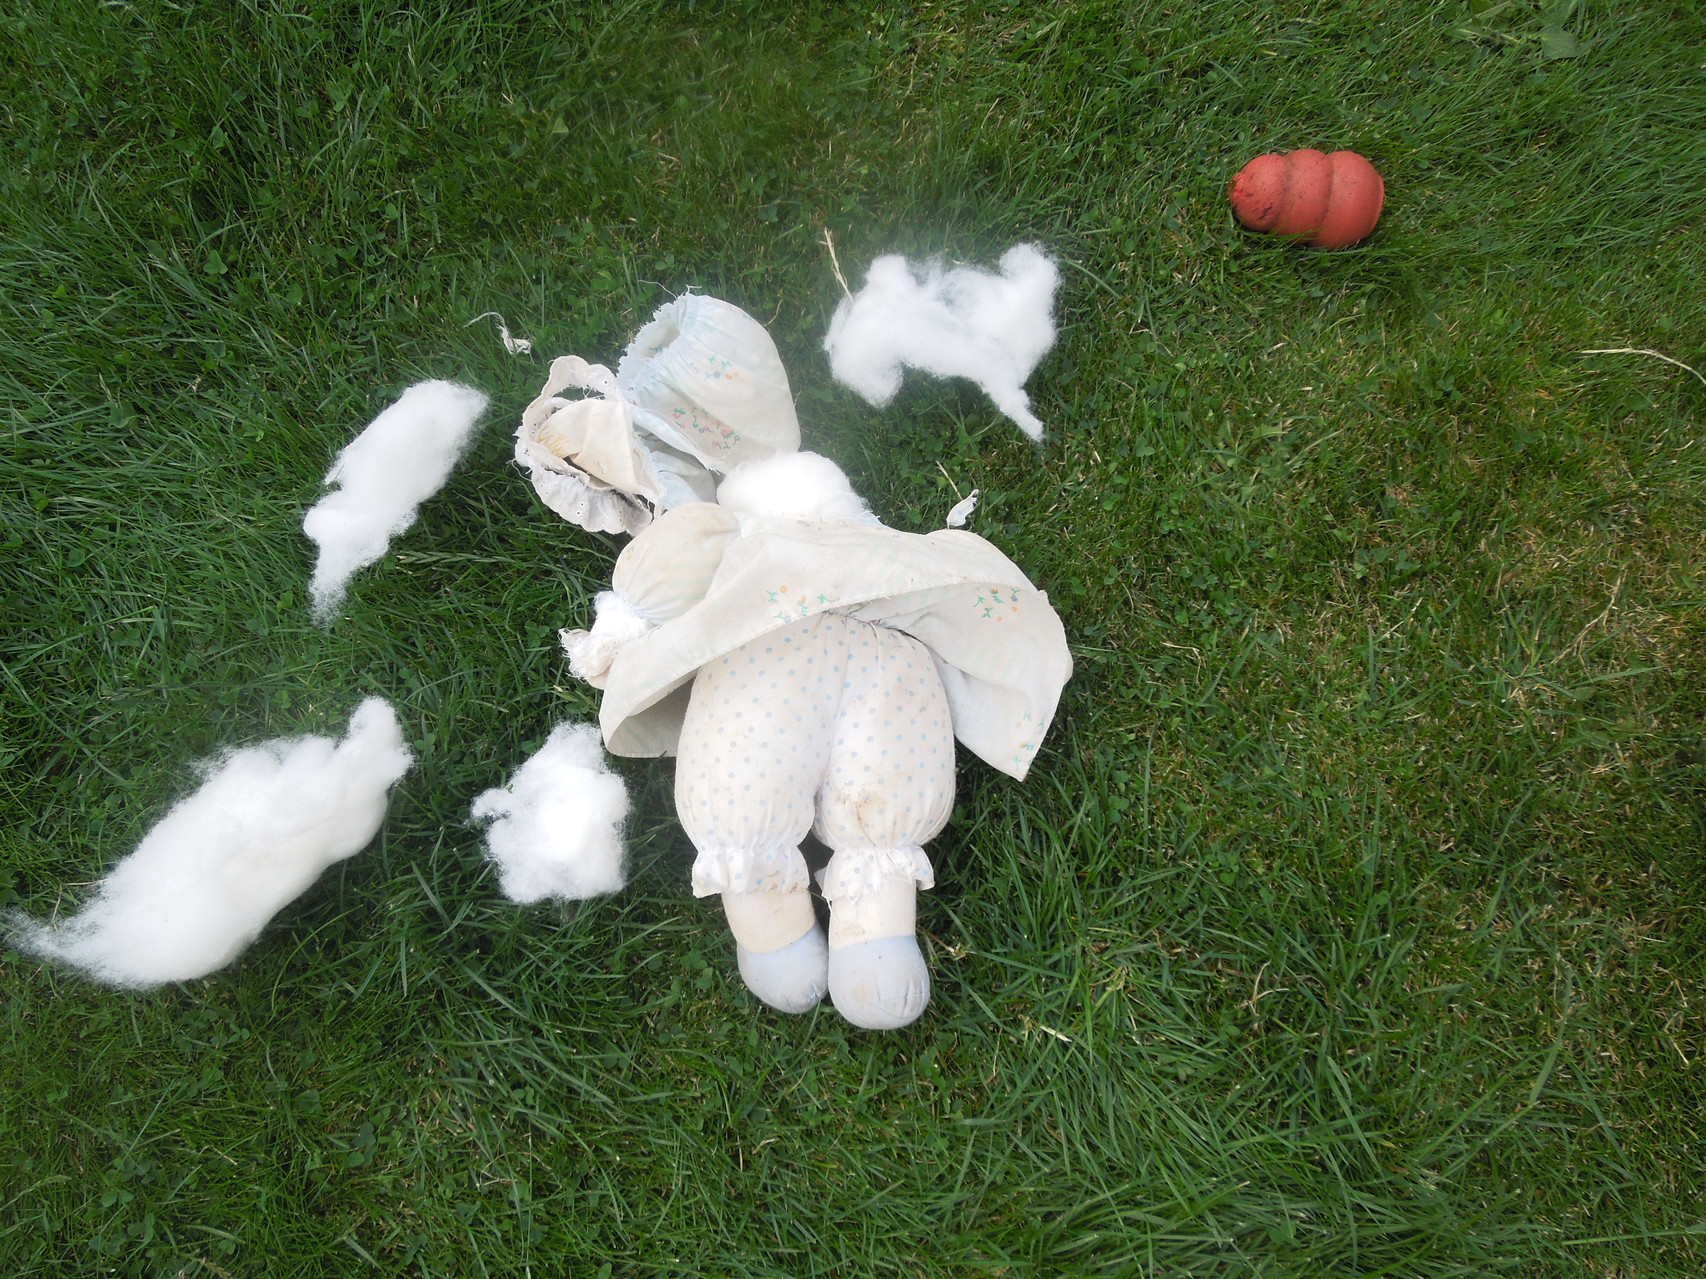 Some of the dog toys didn't survive!